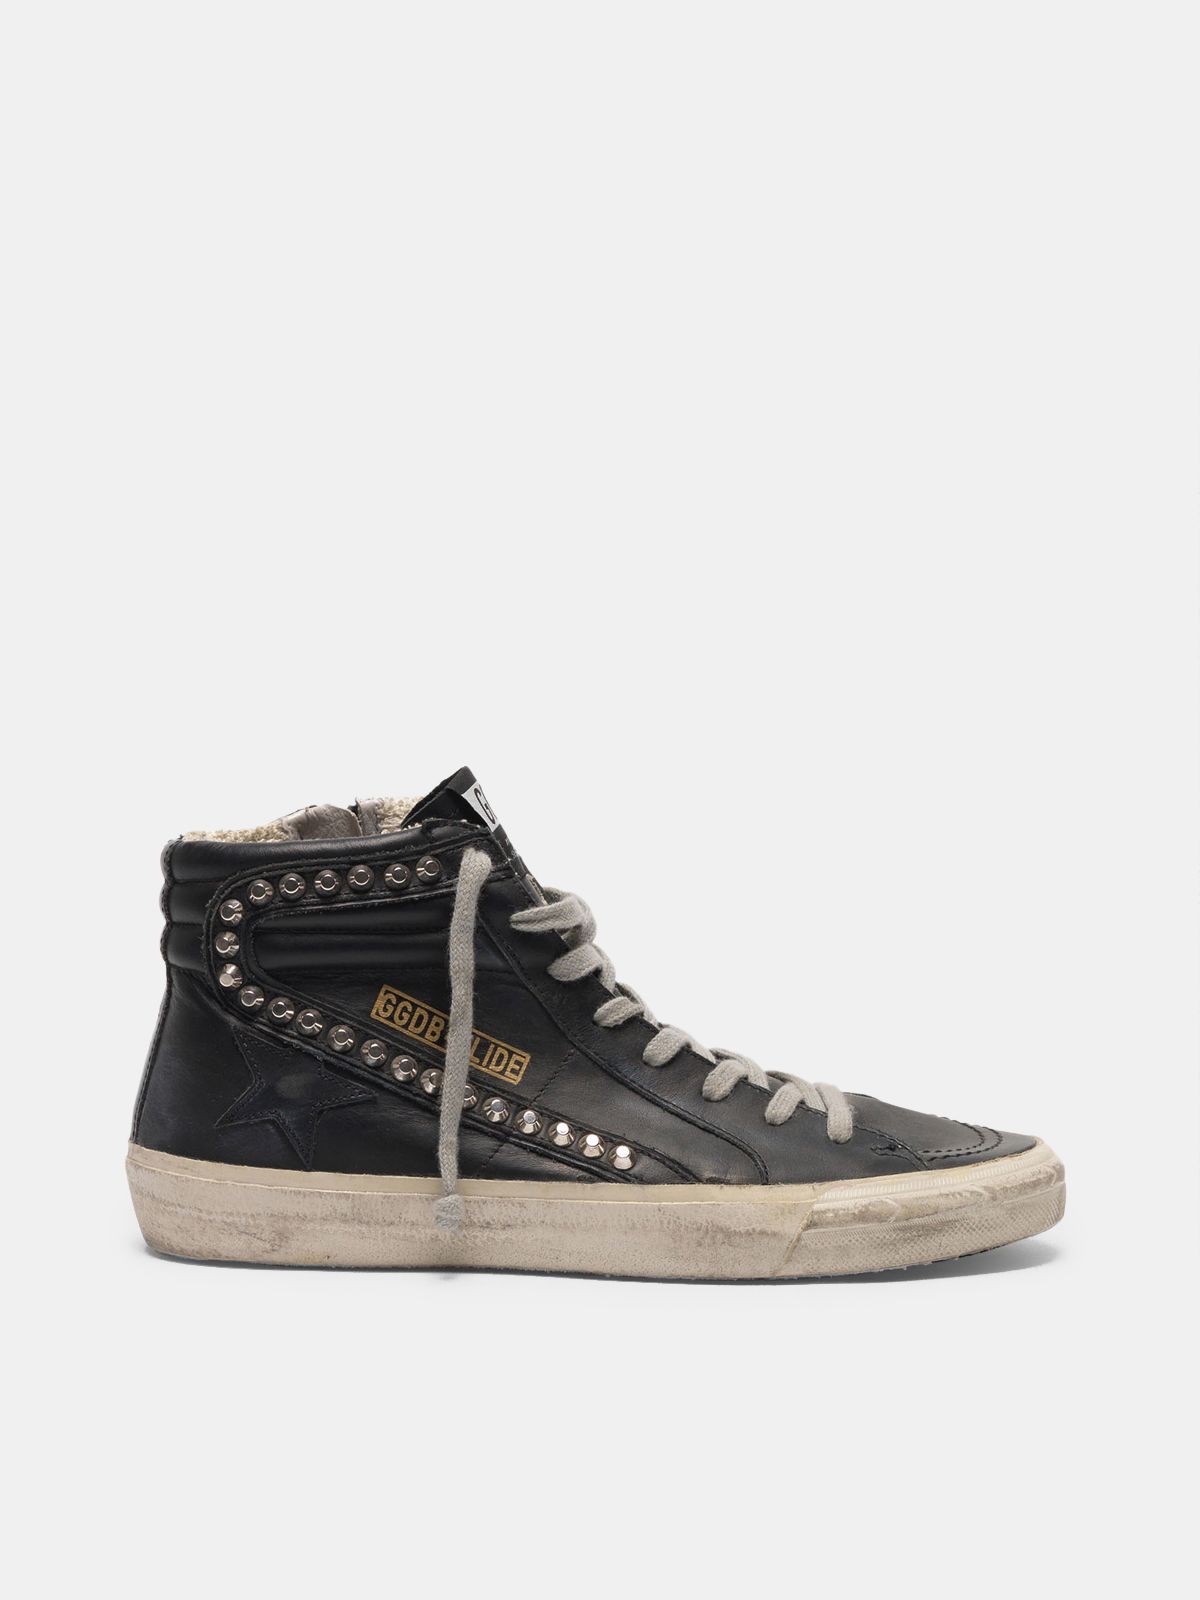 golden goose leather studded in Slide metal sneakers